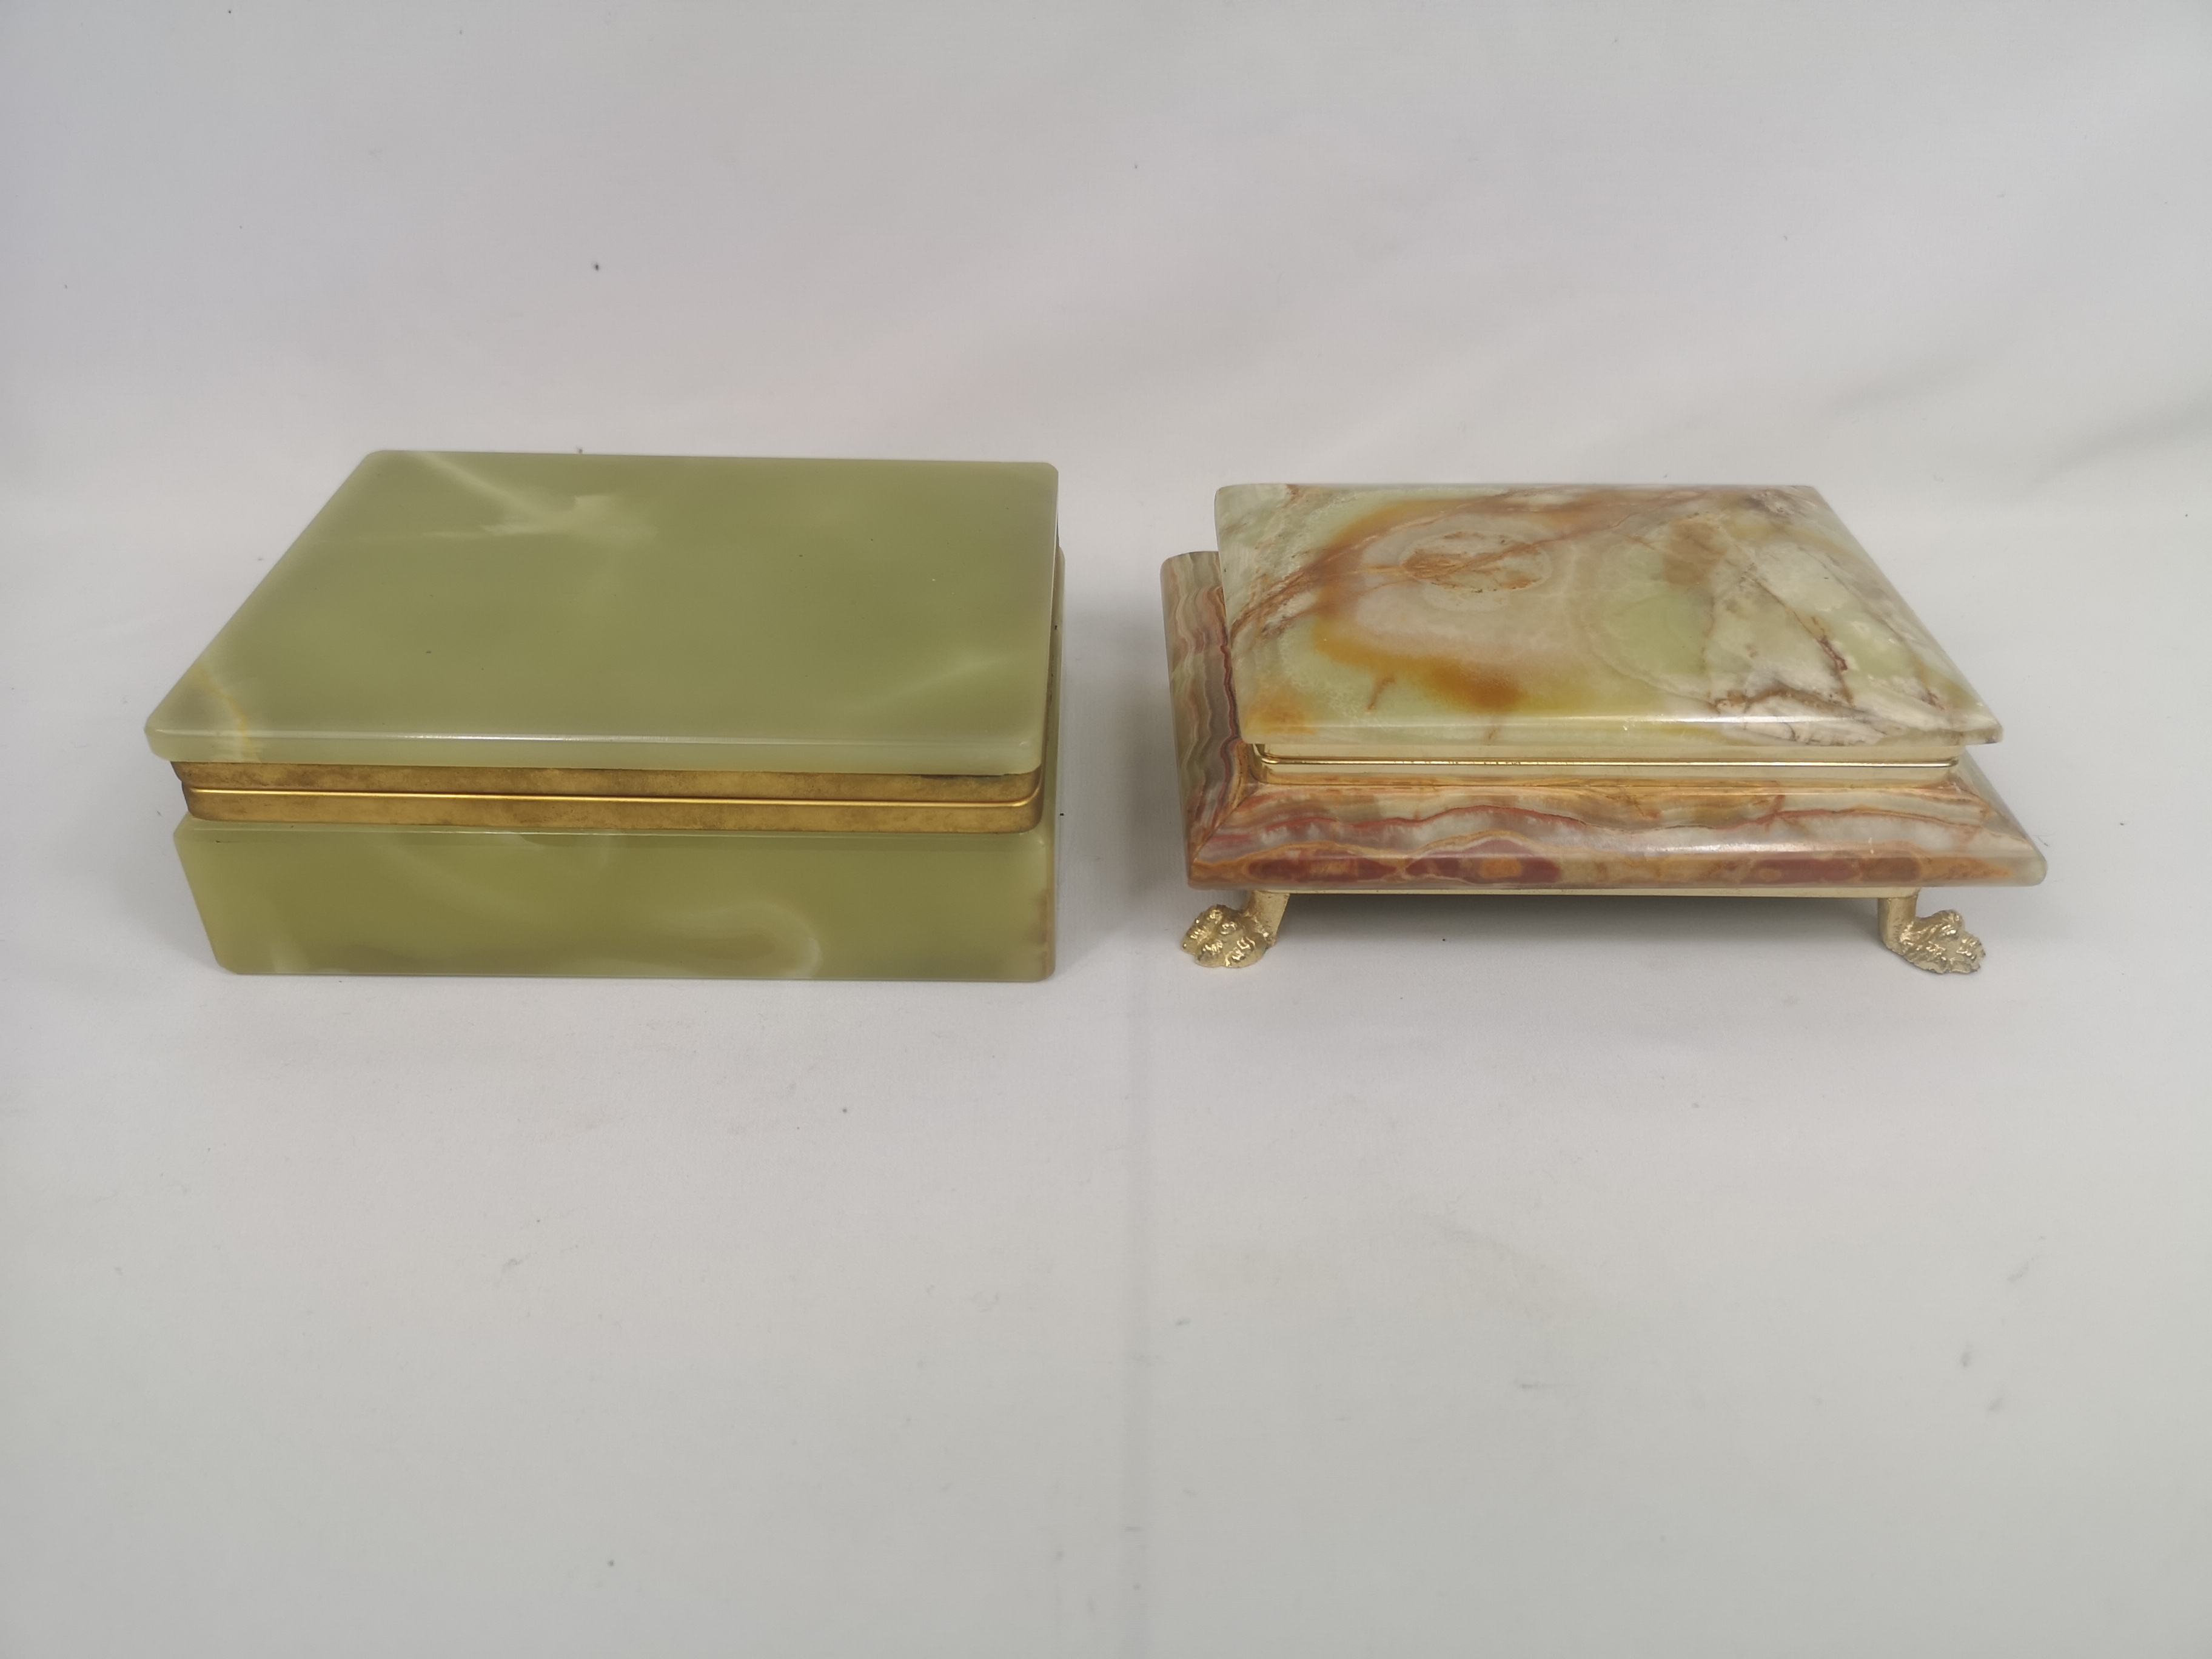 Two onyx boxes